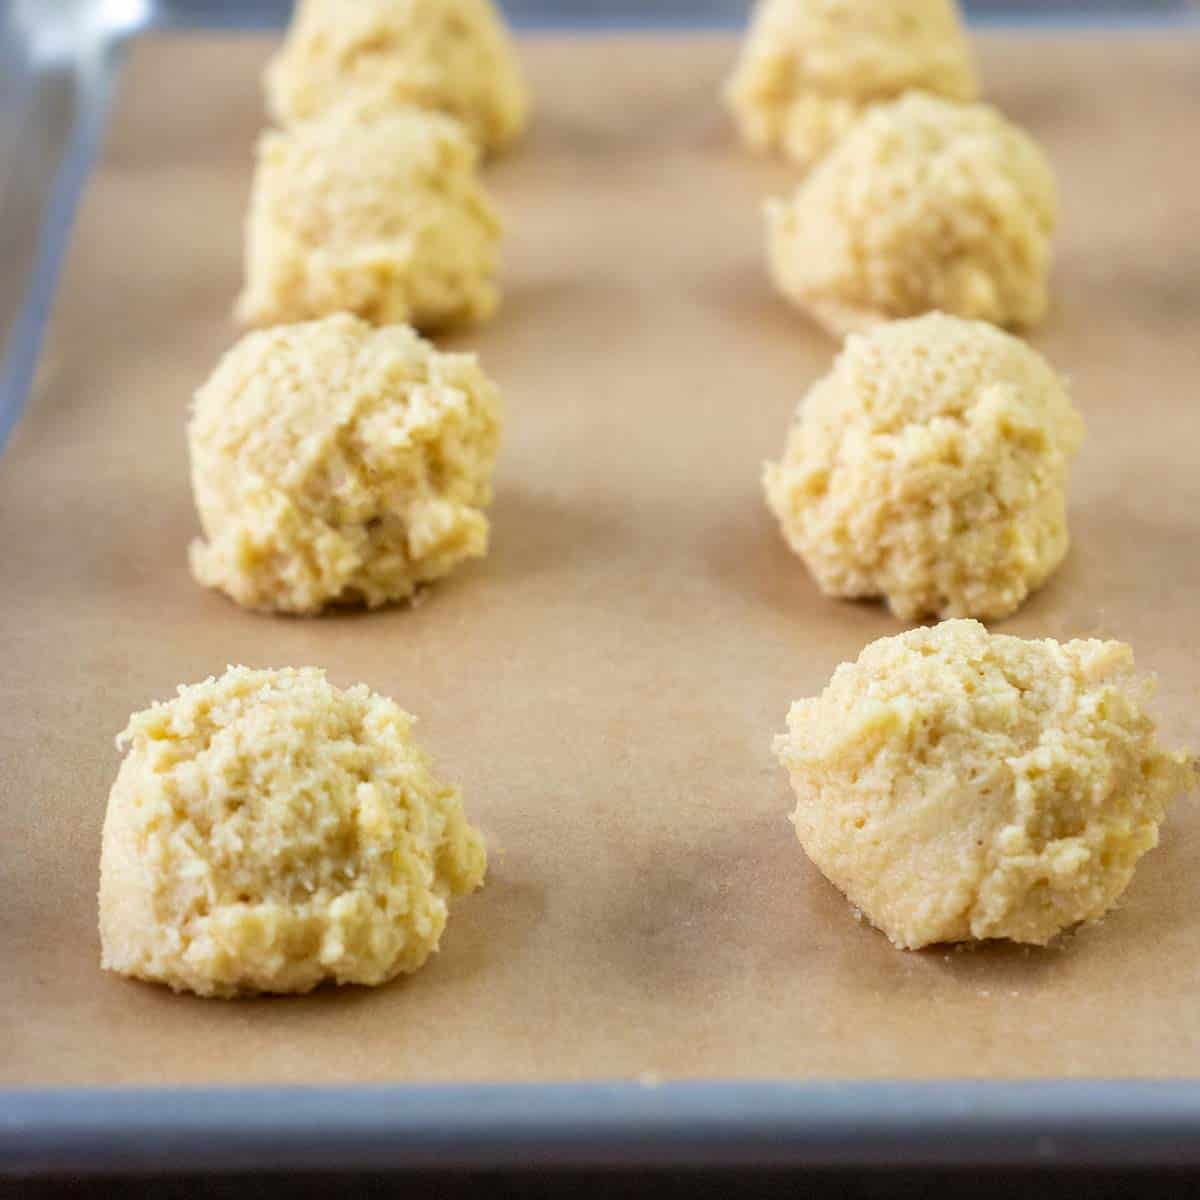 biscuits dropped on parchment lined baking pan with cookie scoop prior to baking.